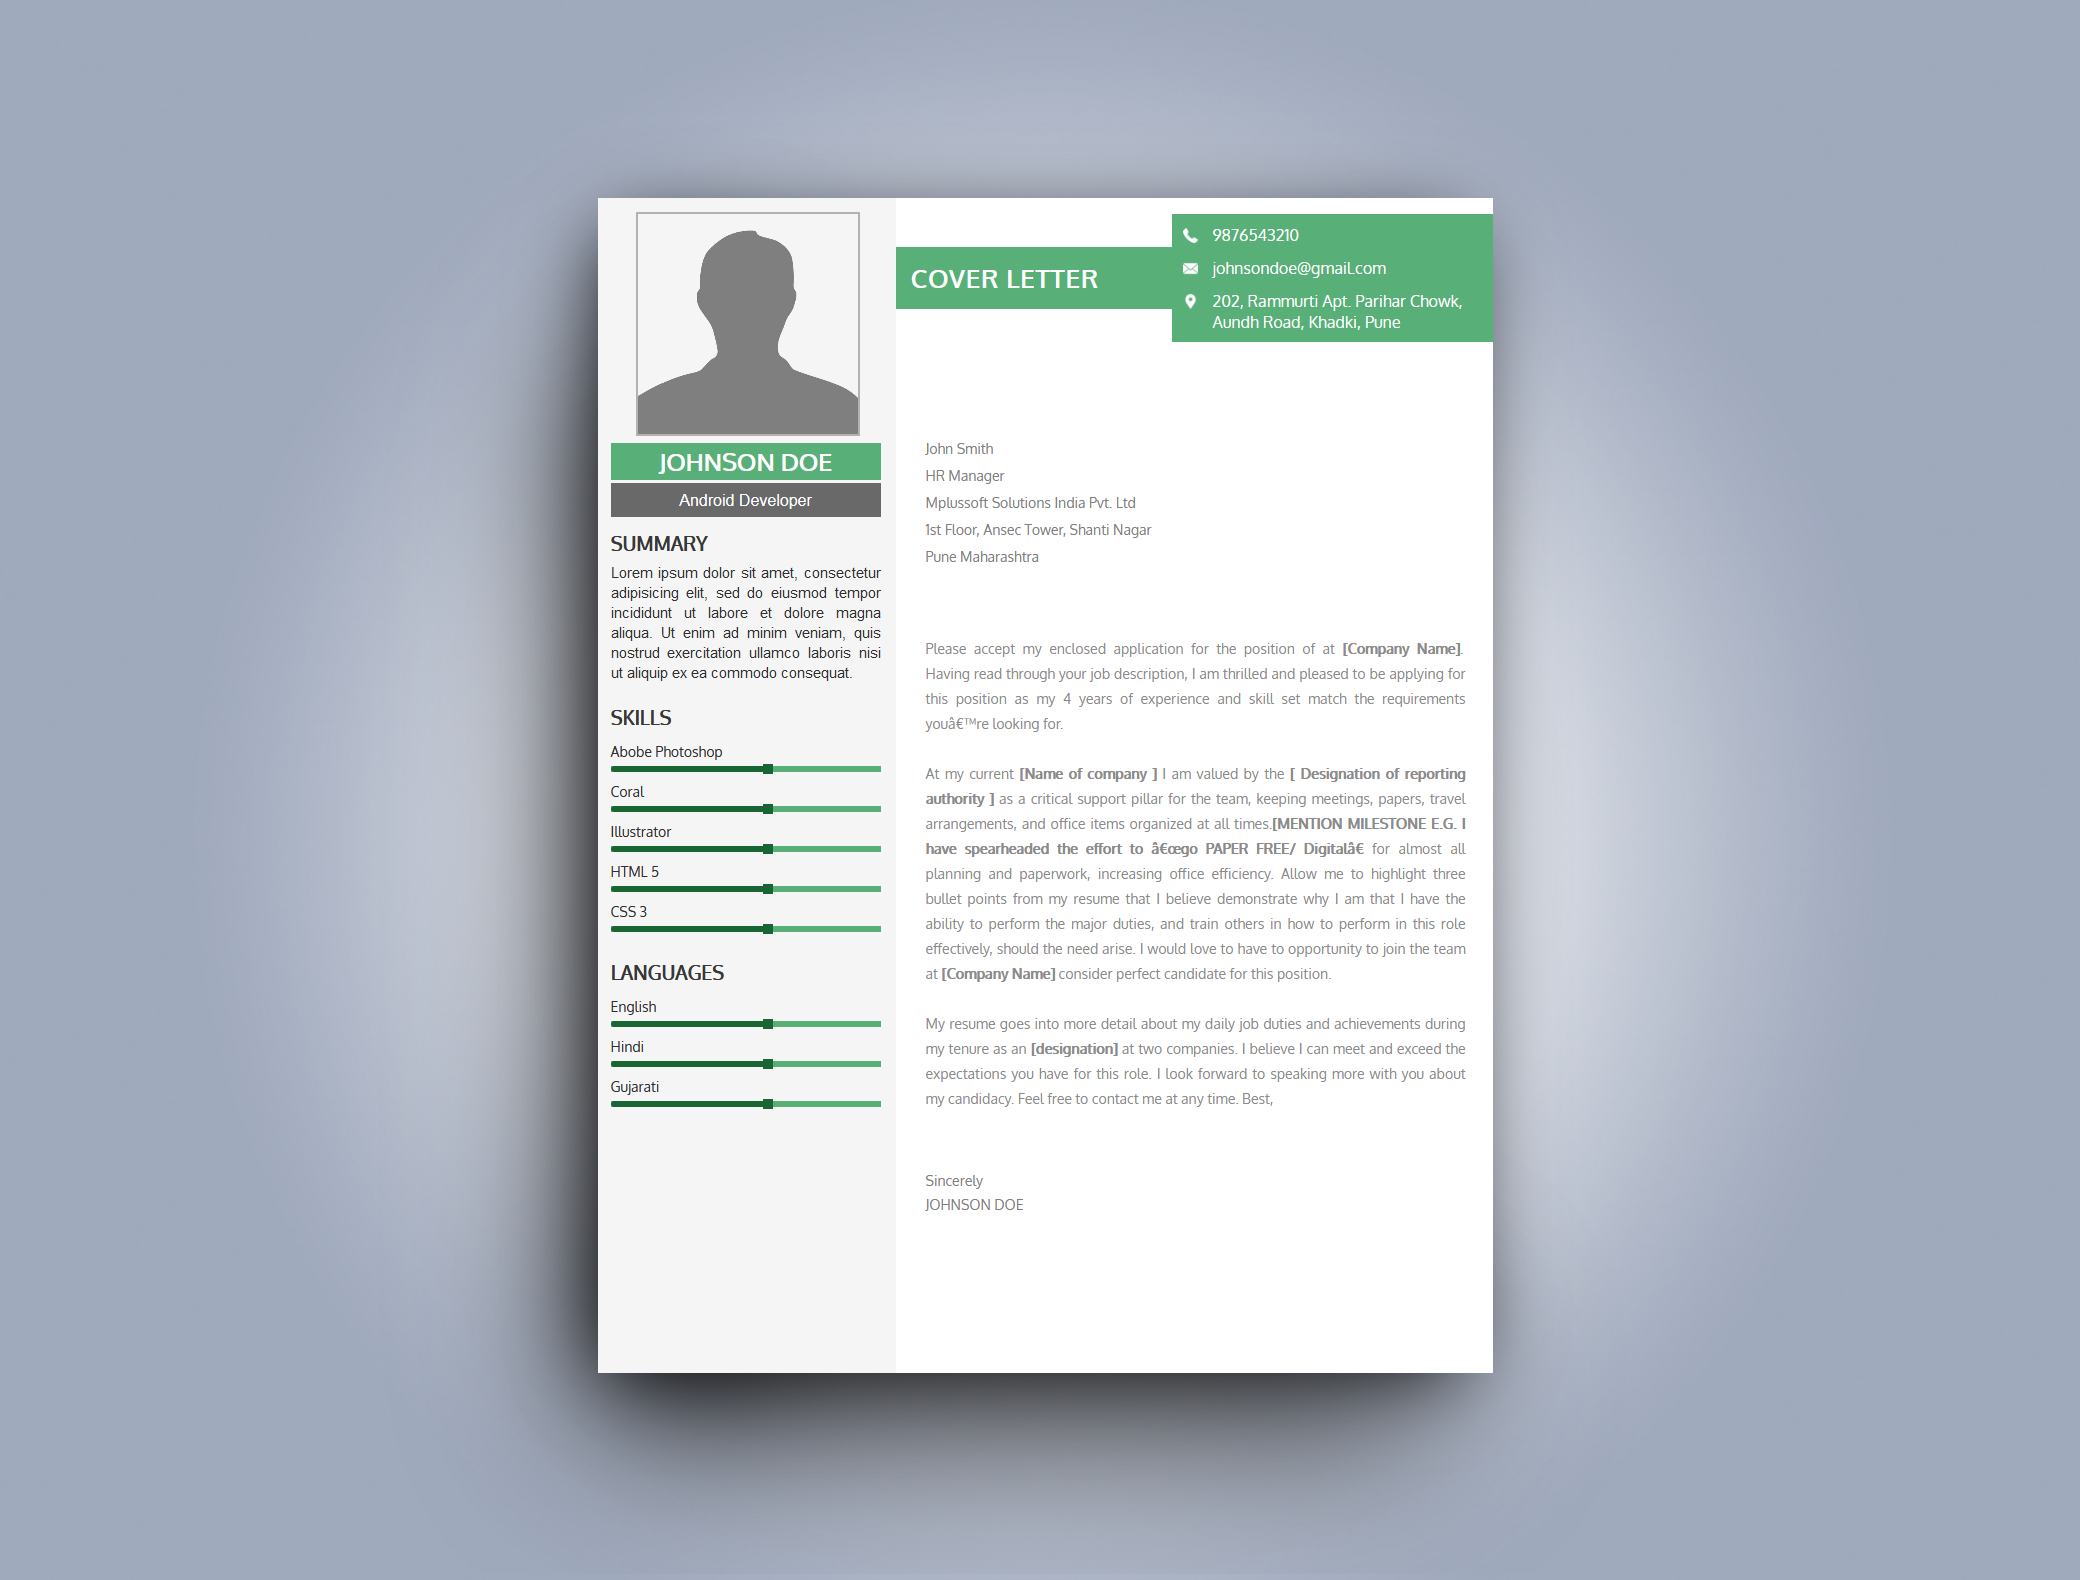 Build a resume that works